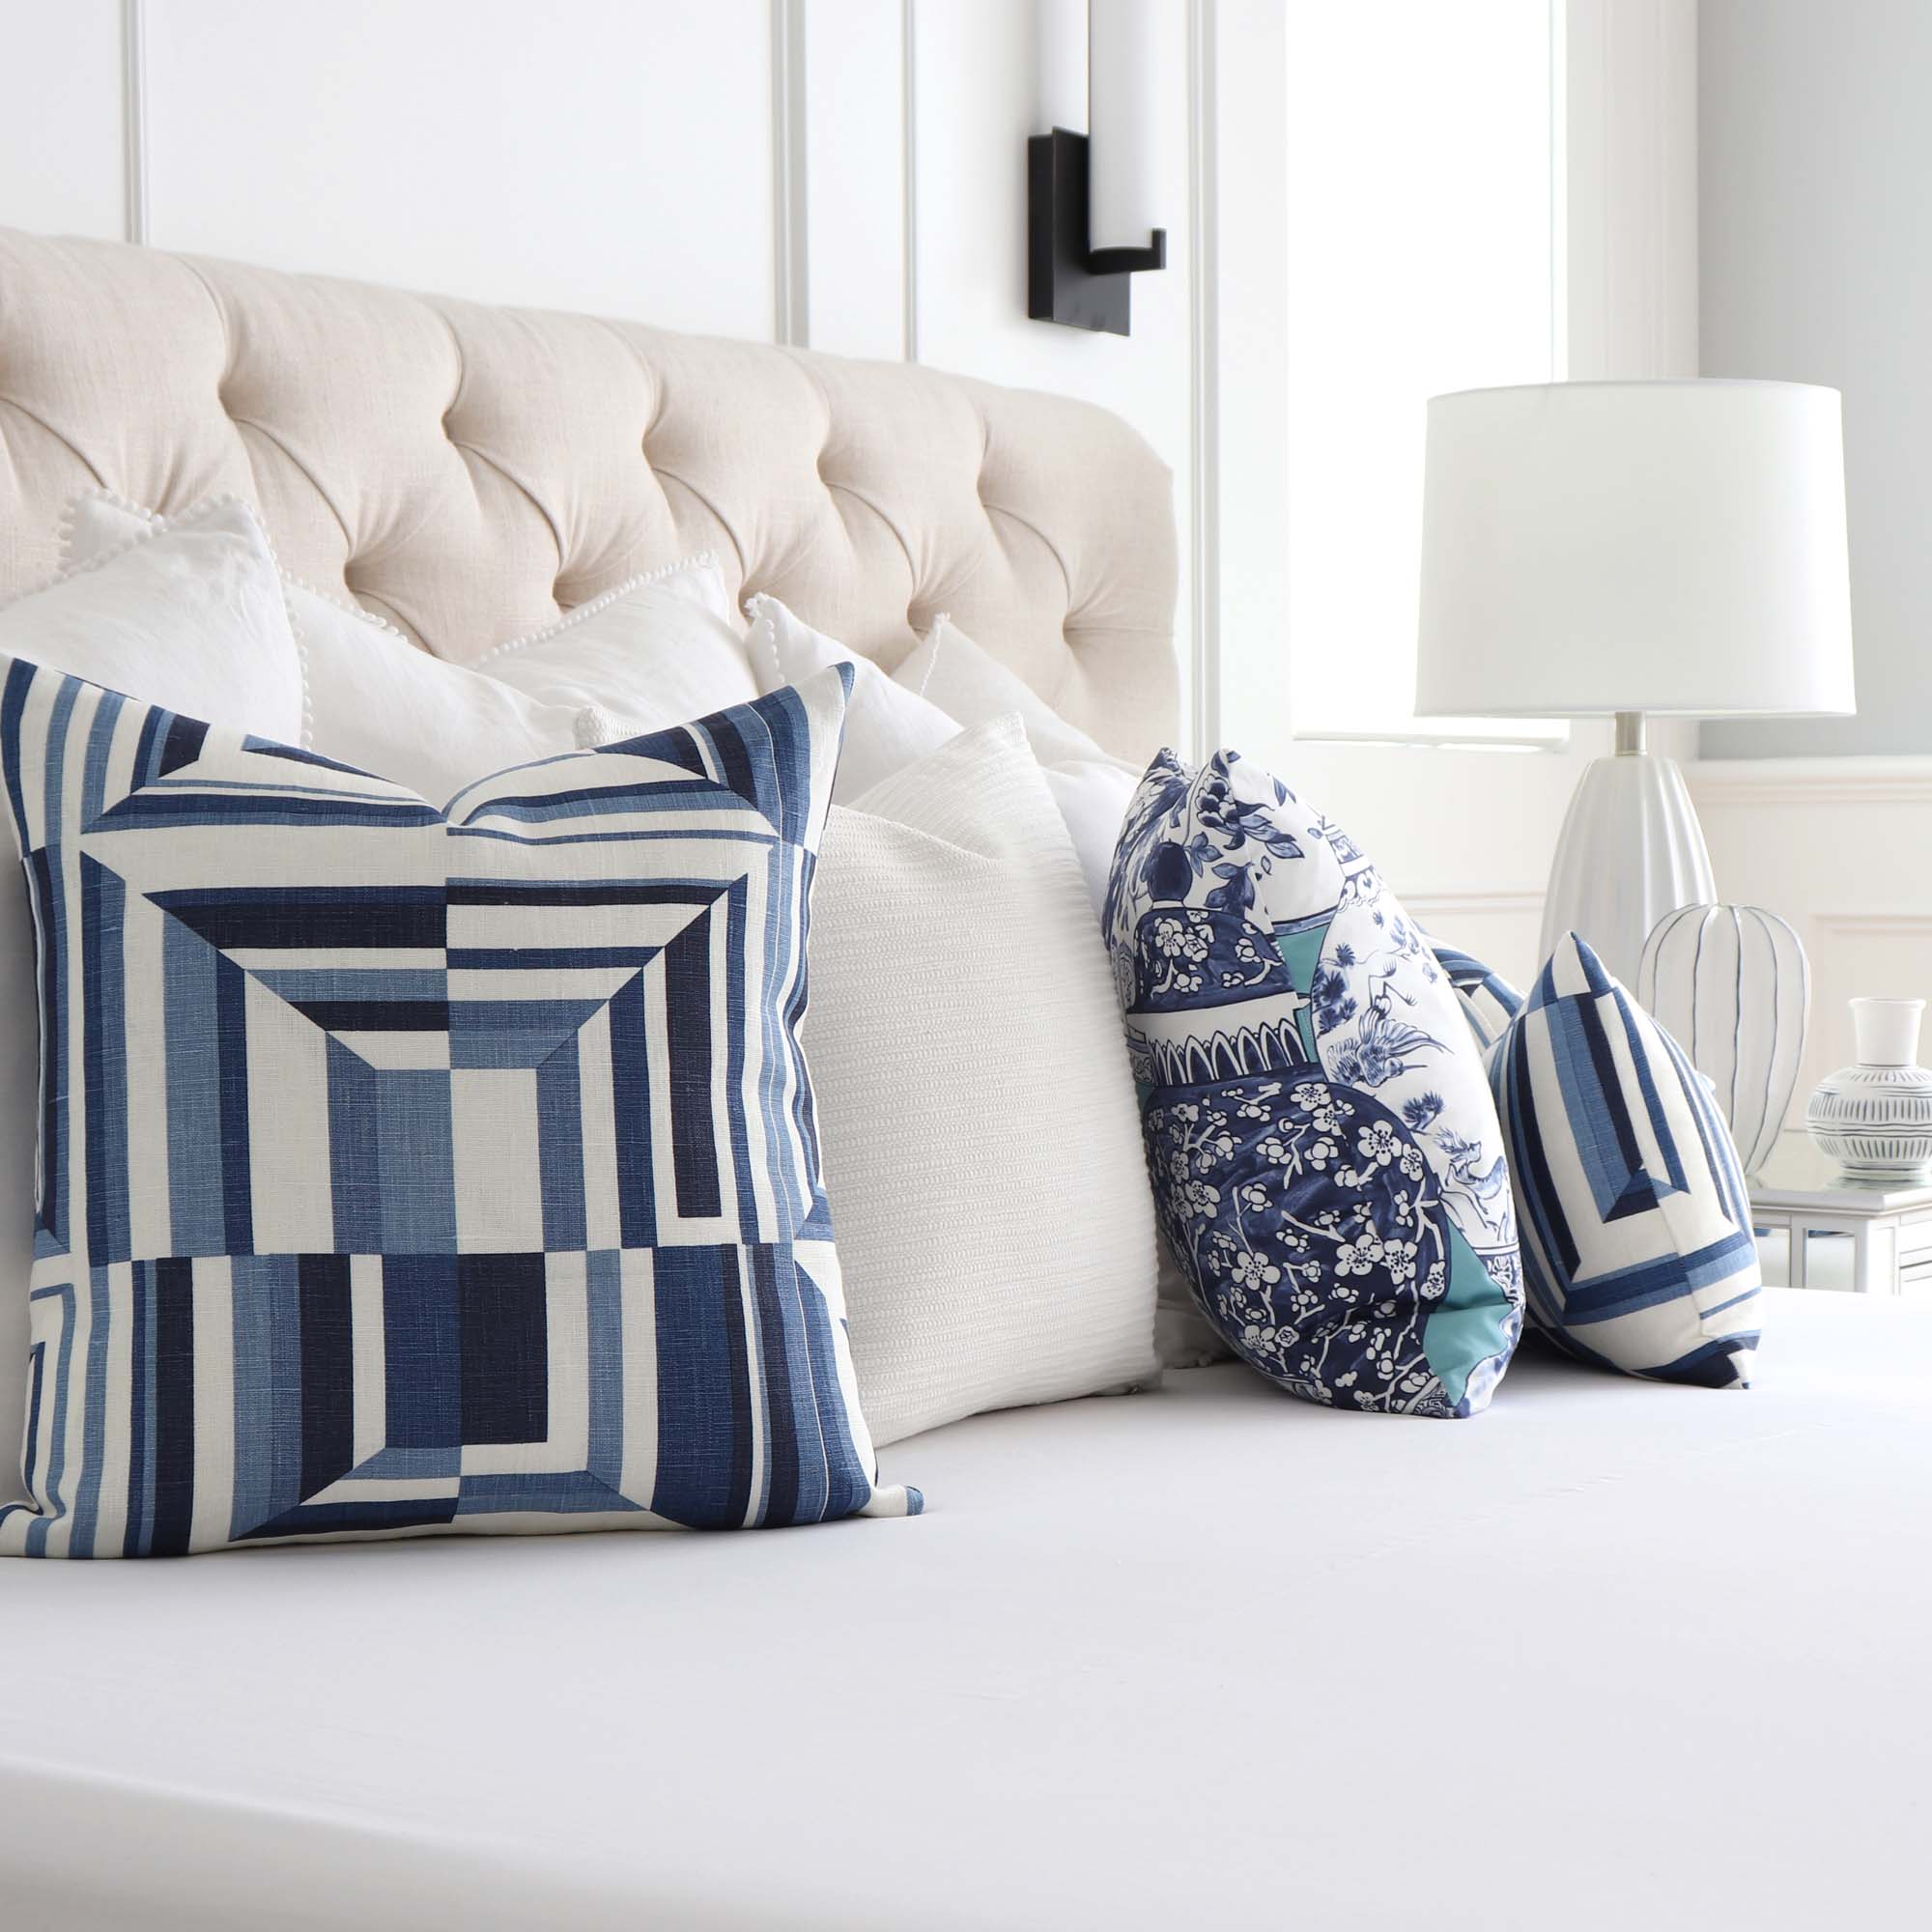 WHite and blue pillows accent a white linen couch placed in a